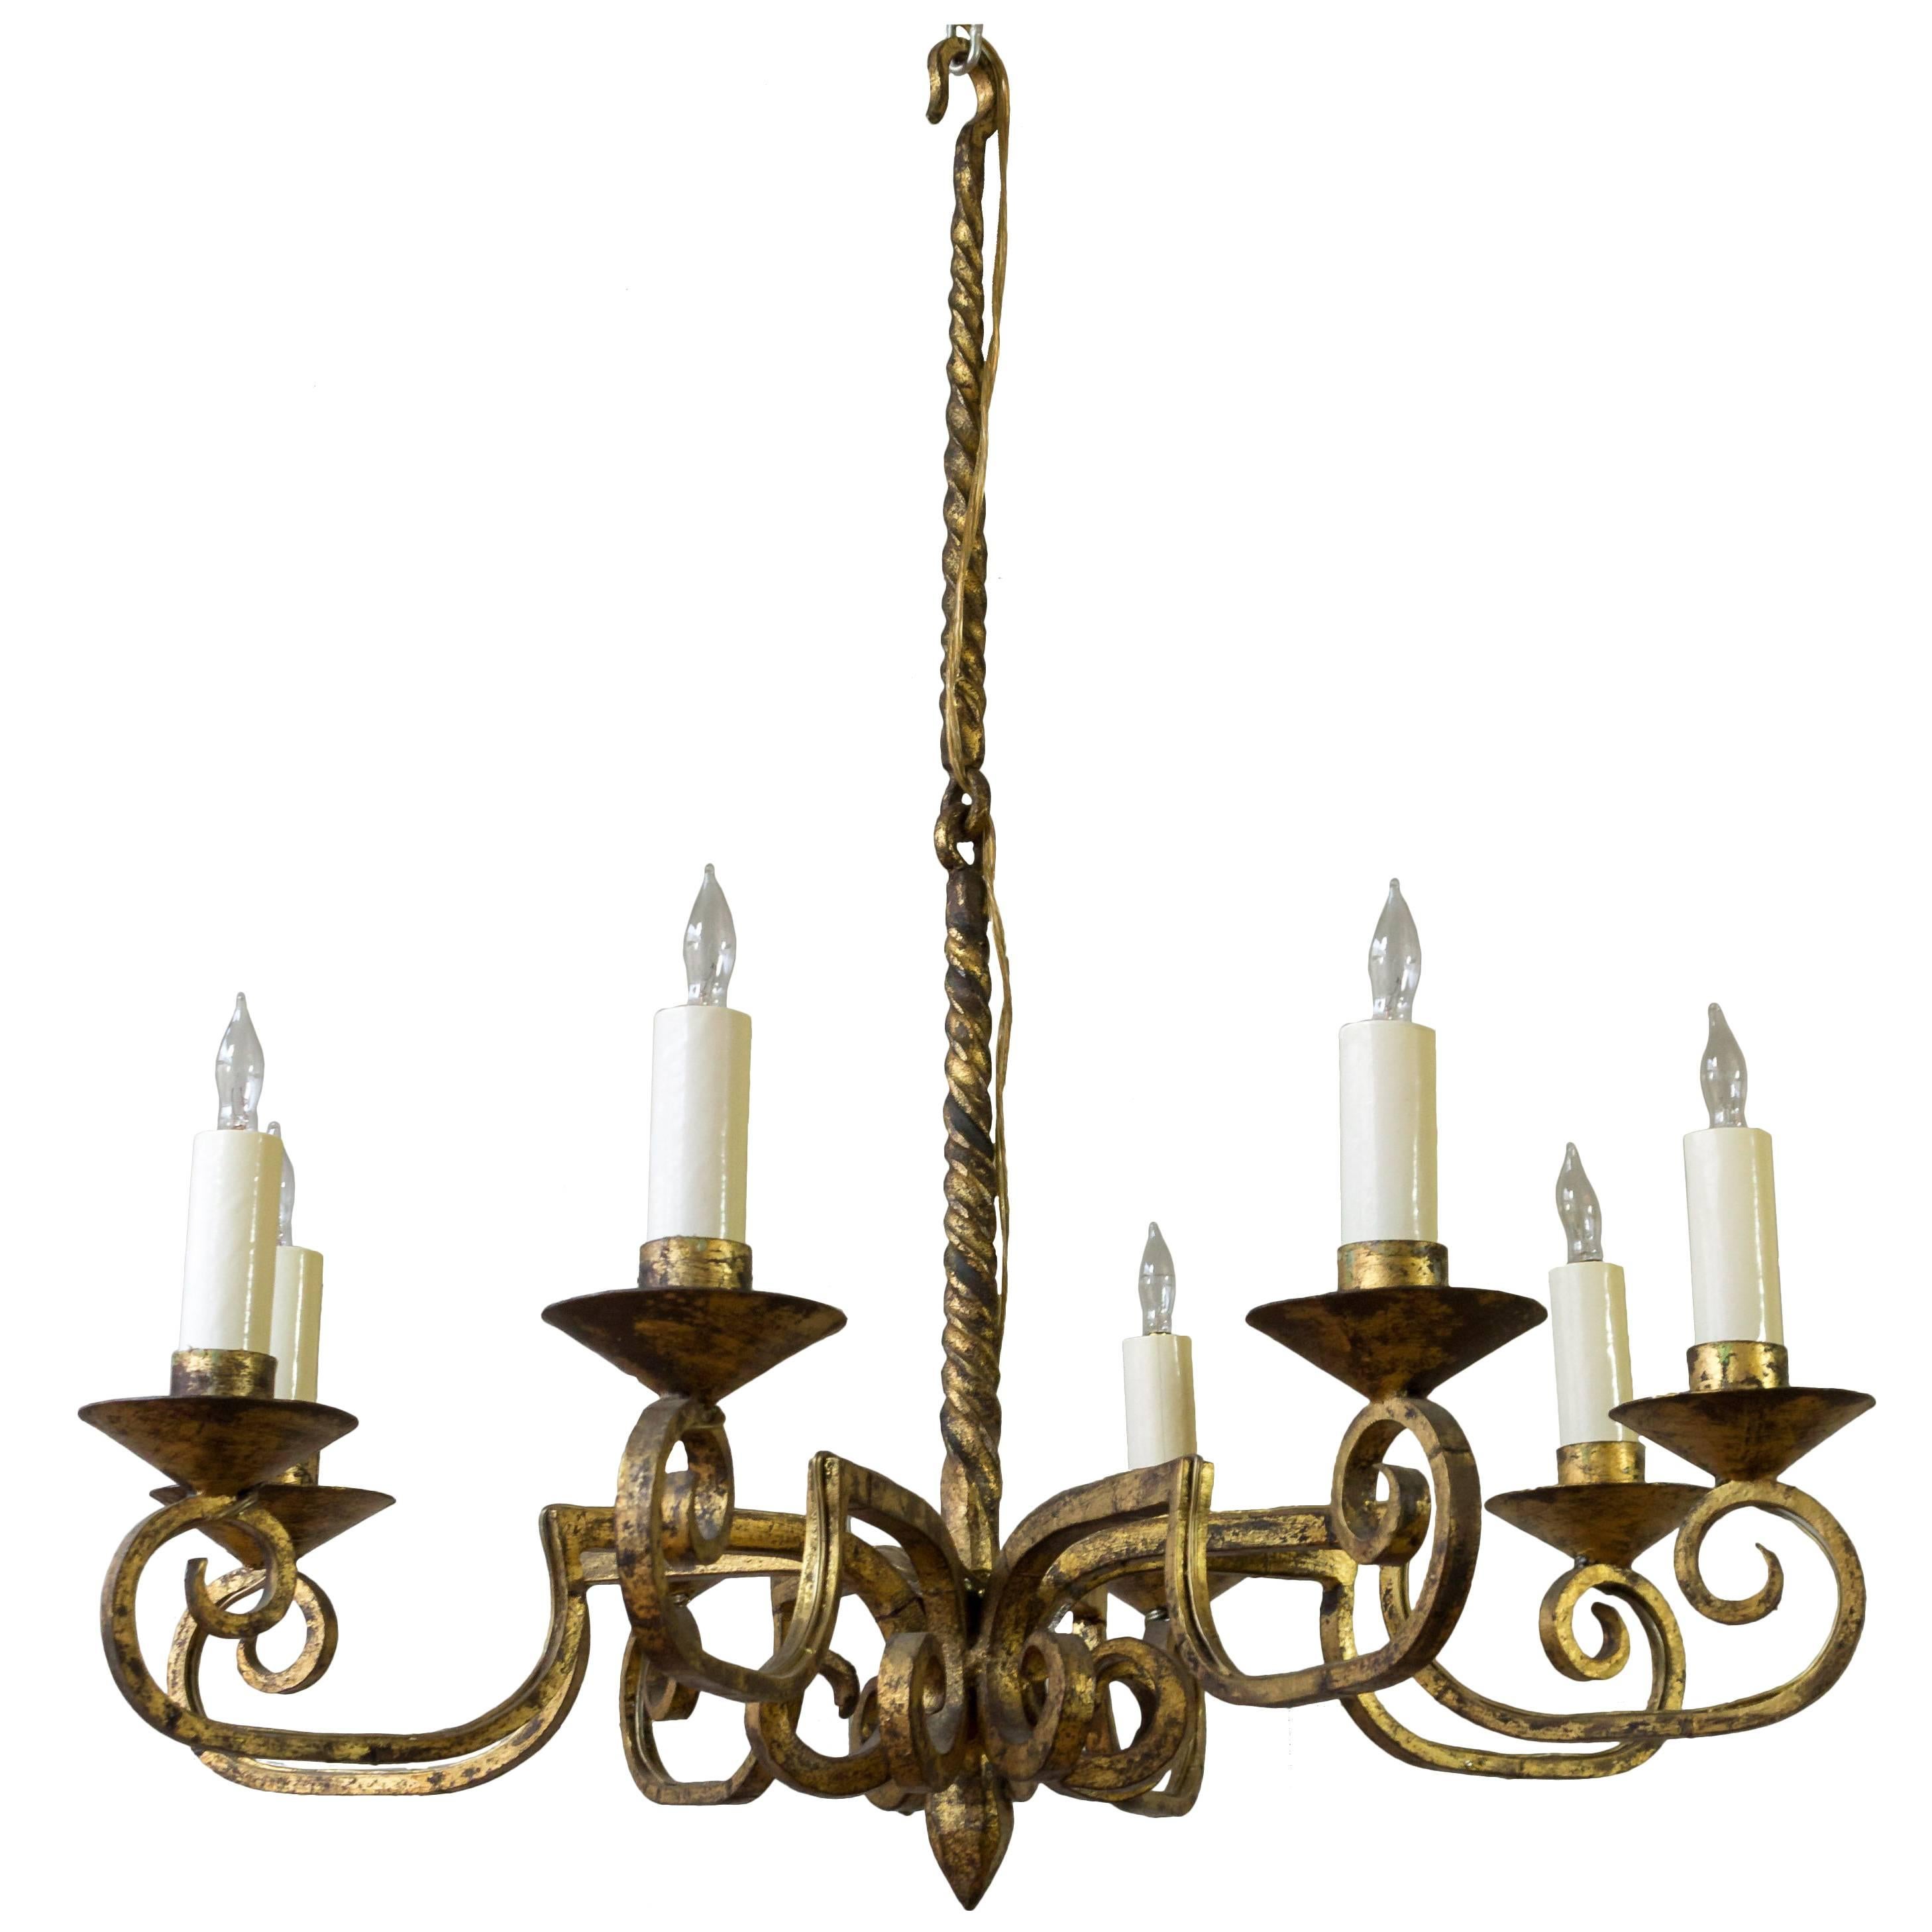 Unusual Spanish 19th Century Eight-Armed Chandelier with Twisted Metal Stem